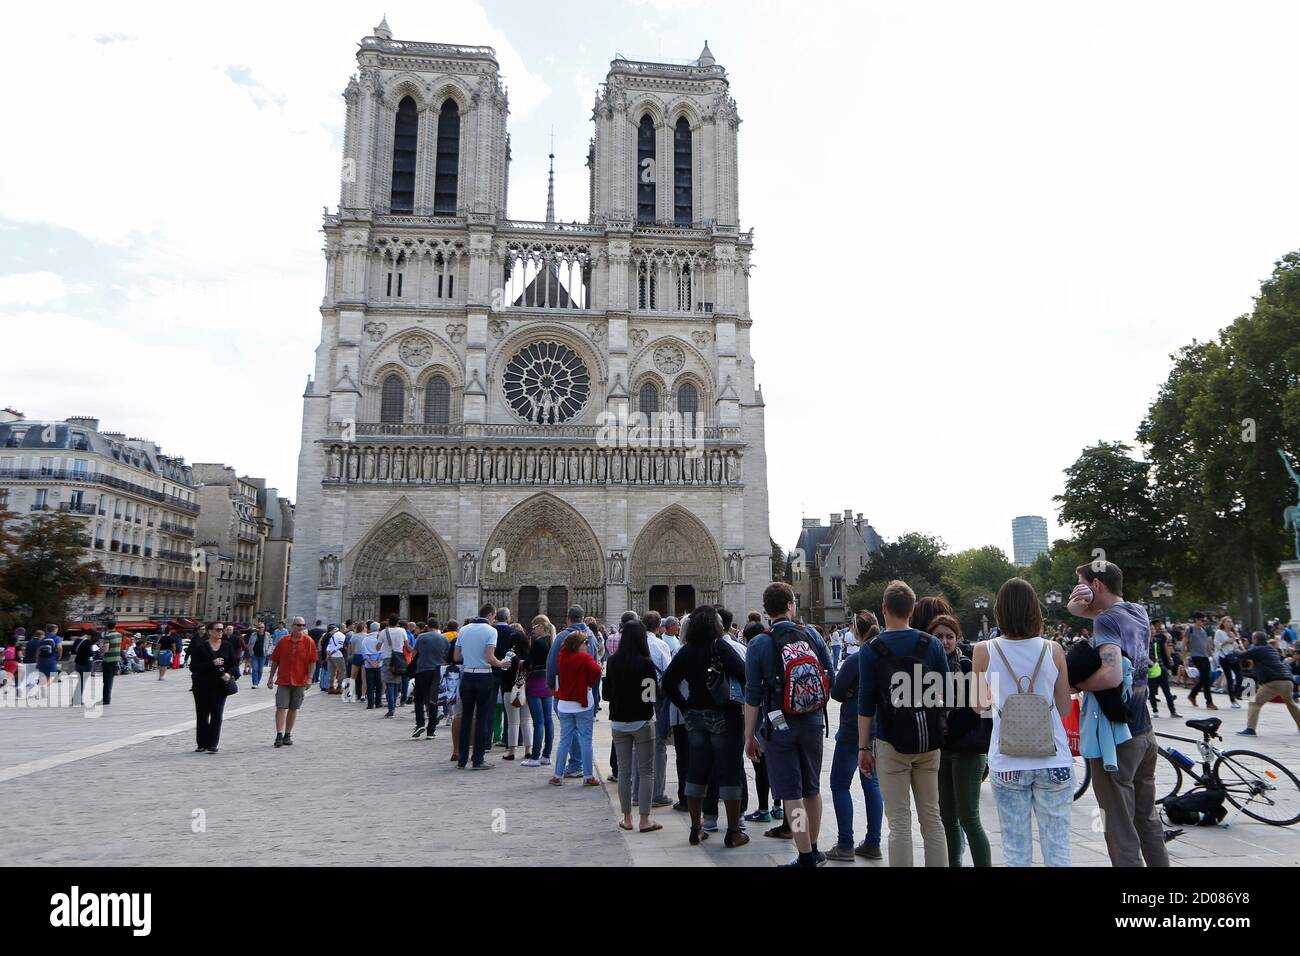 People stand in line outside Notre Dame Cathedral in Paris, August 22,  2014. The cathedral greets some 13 million tourists a year according to  their official web site. The construction of the